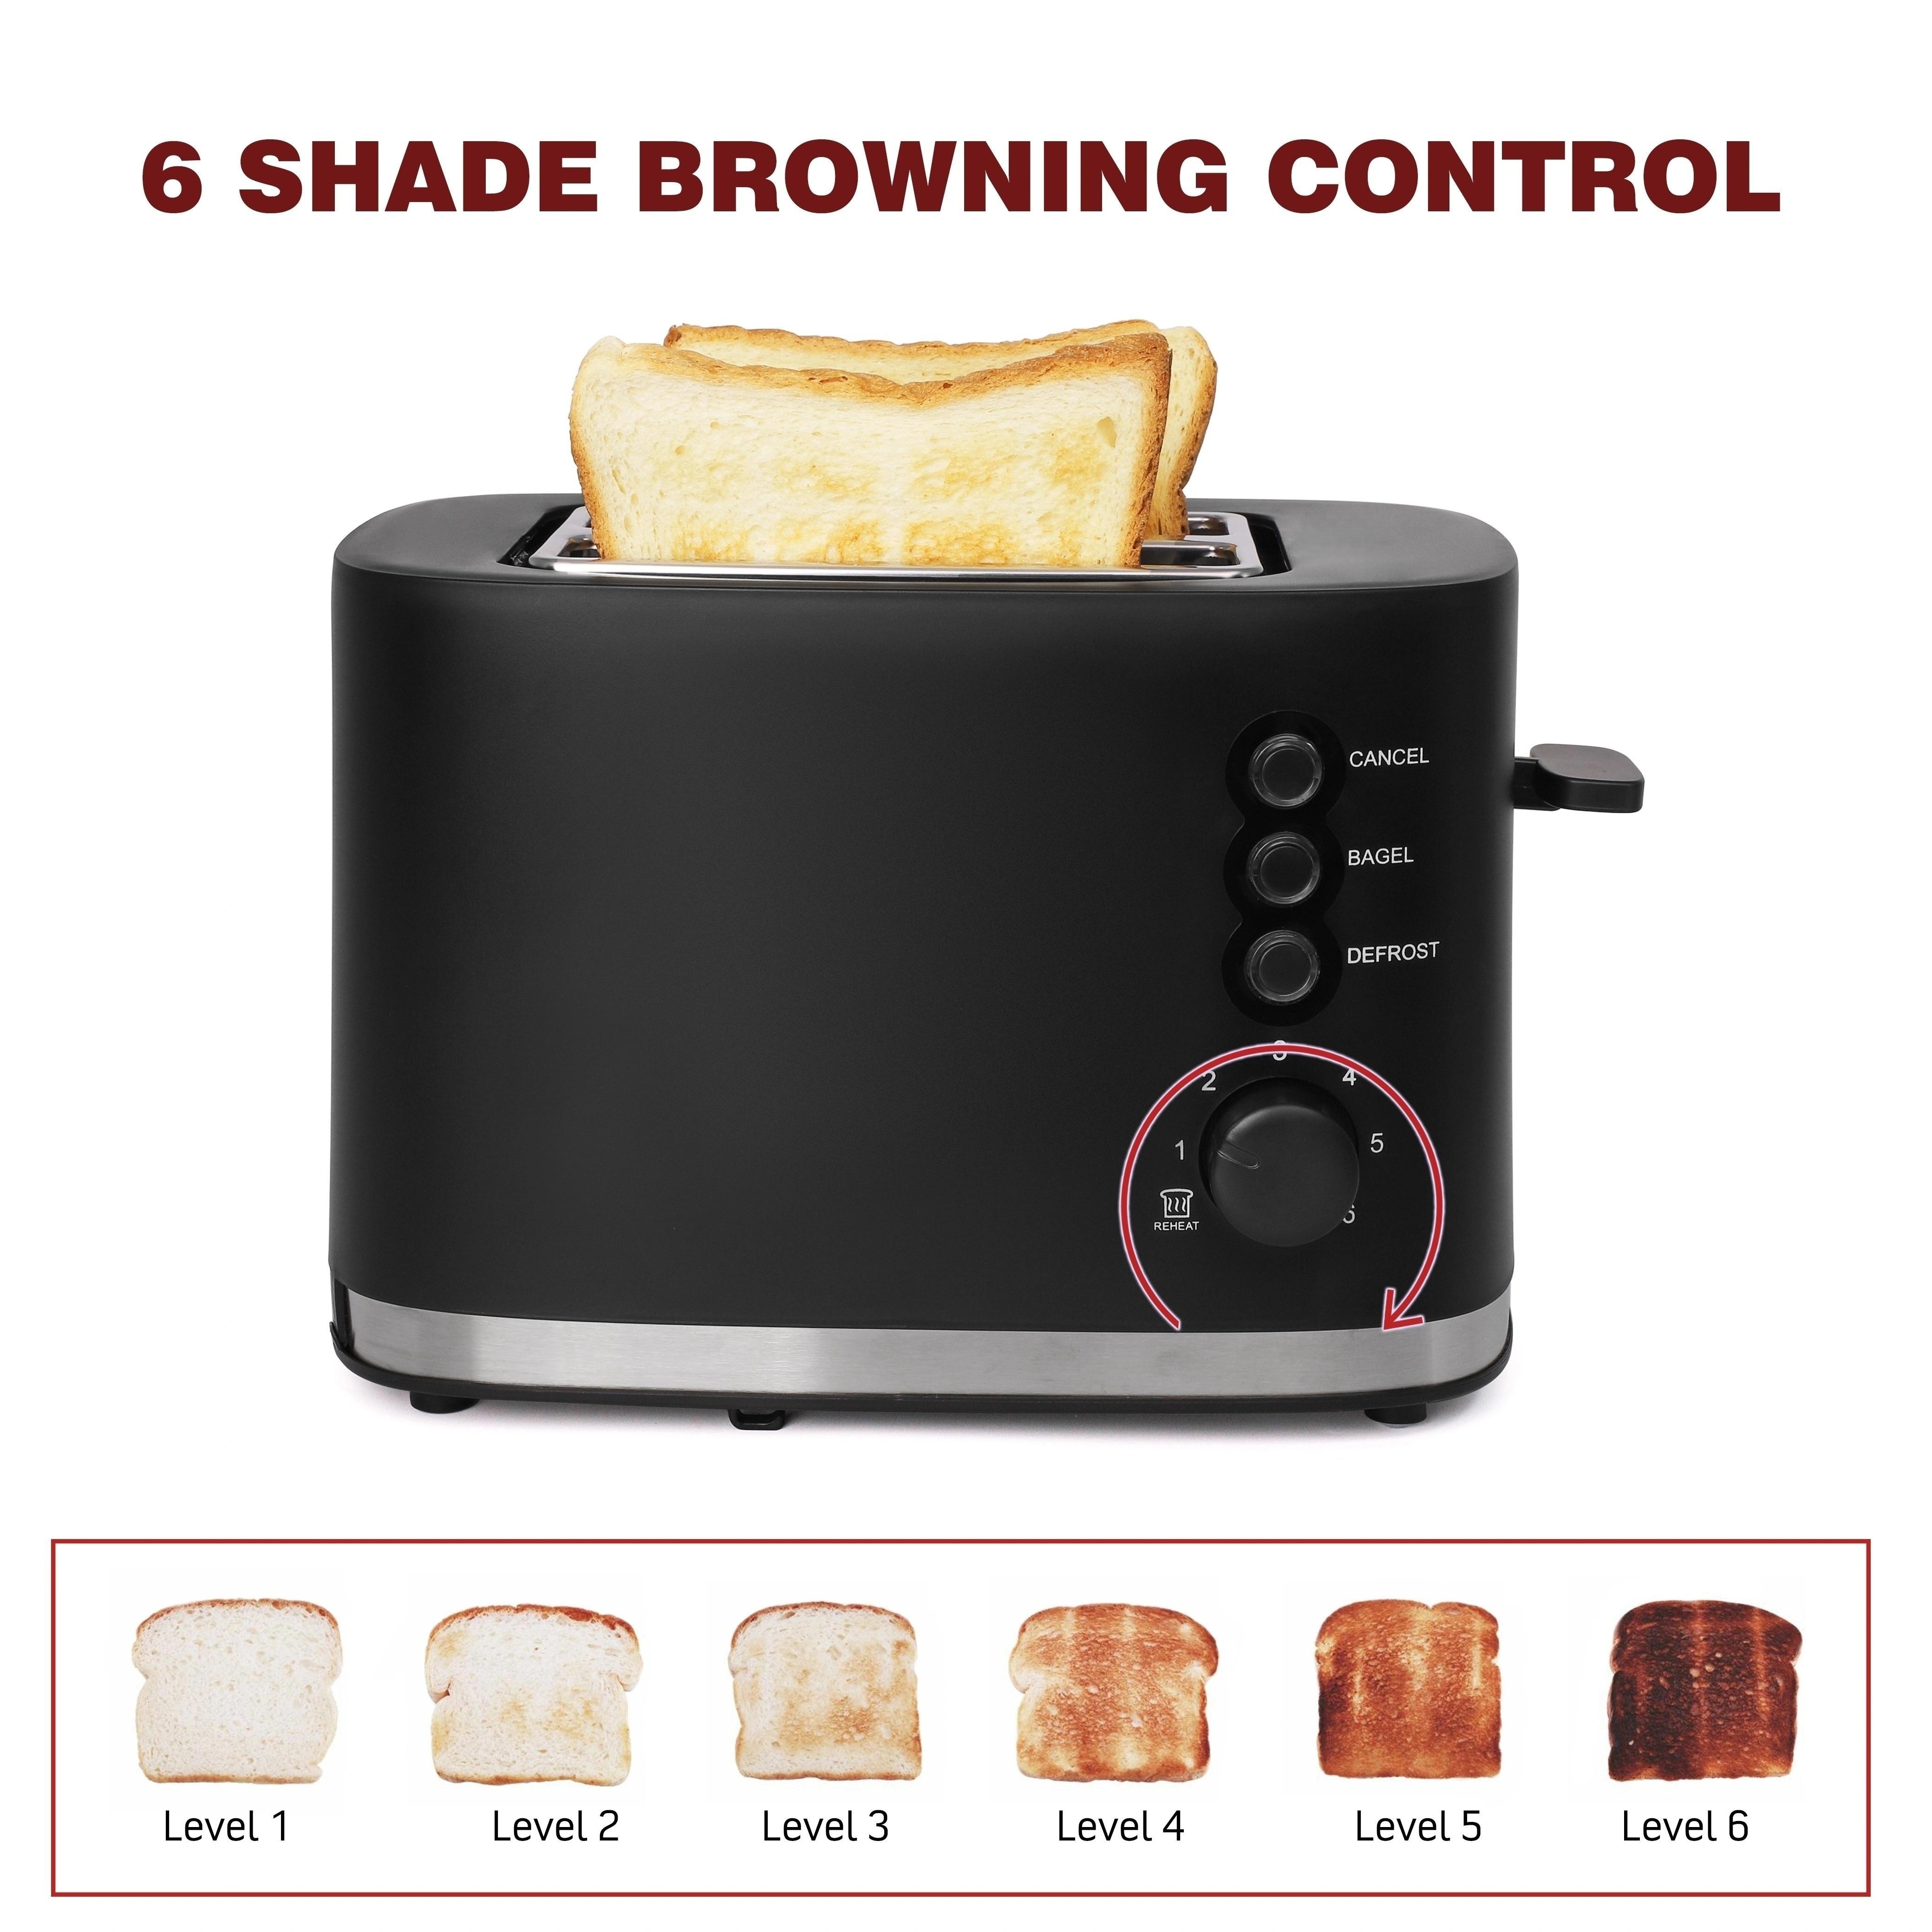 Long Slot Toaster 2 Slice Best Toaster 2 Slice Wide Slot, Vintage Black  Toaster with Defrost/Reheat/Cancel/6 Bread Shade Settings/Removable Crumb  Tray